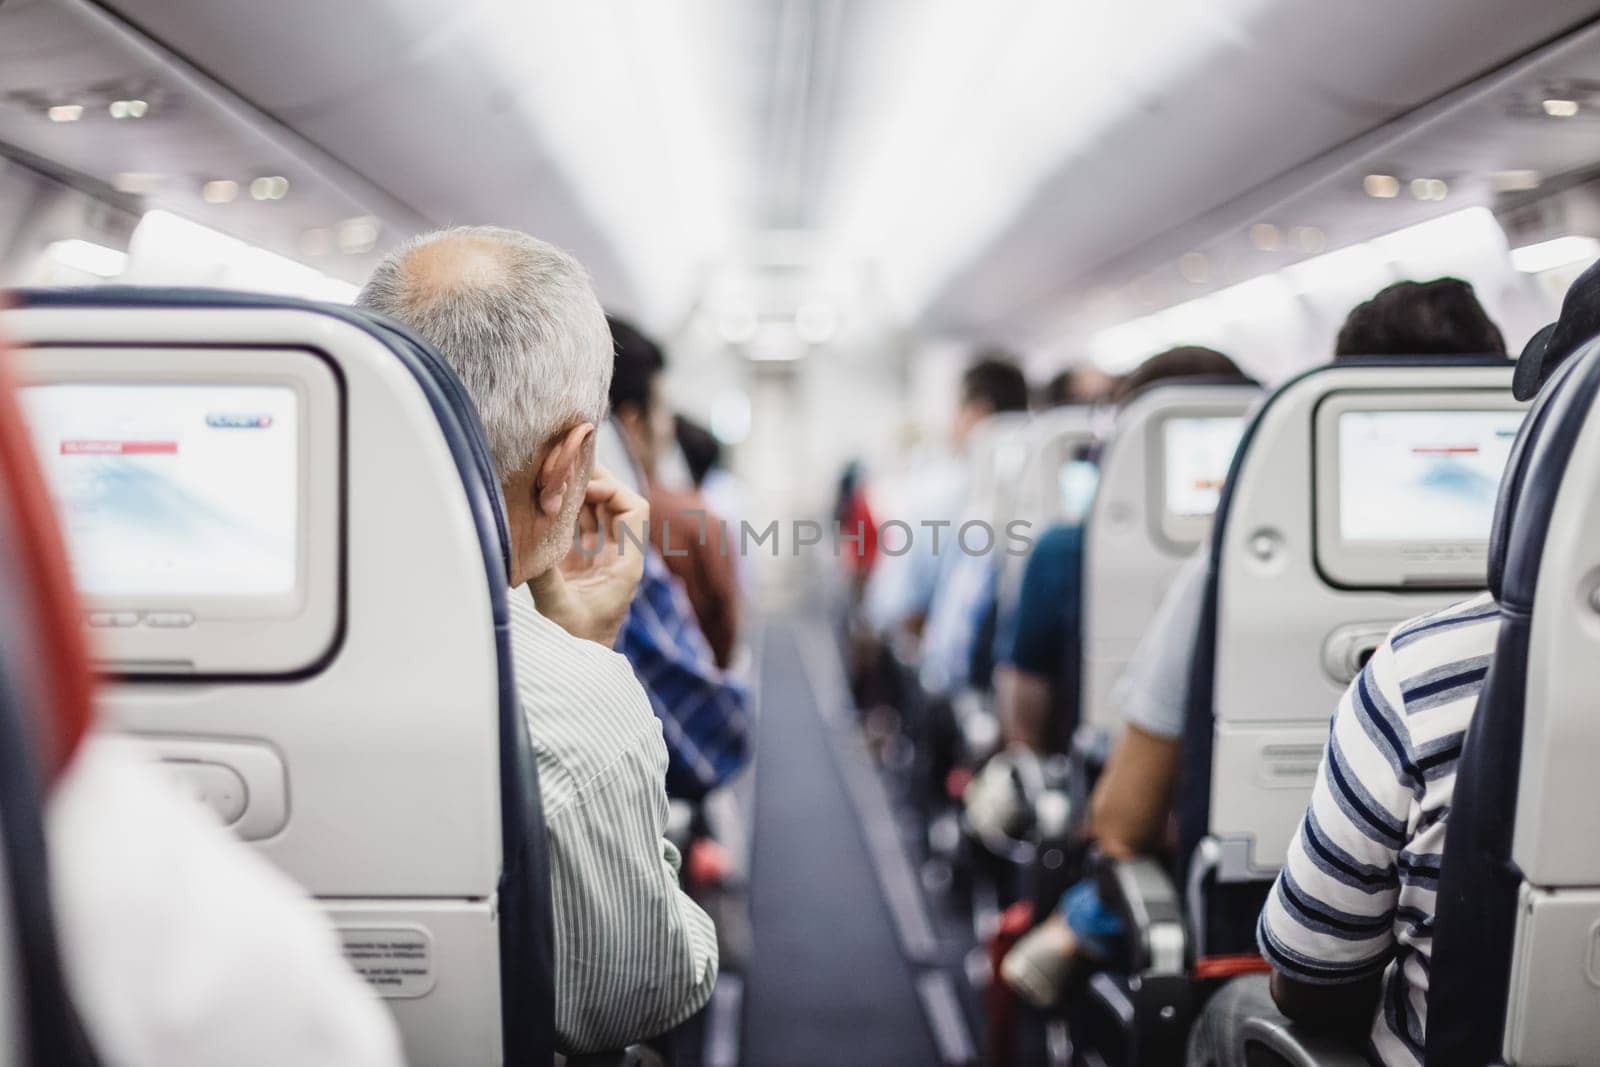 Passengers on the airplane. by kasto